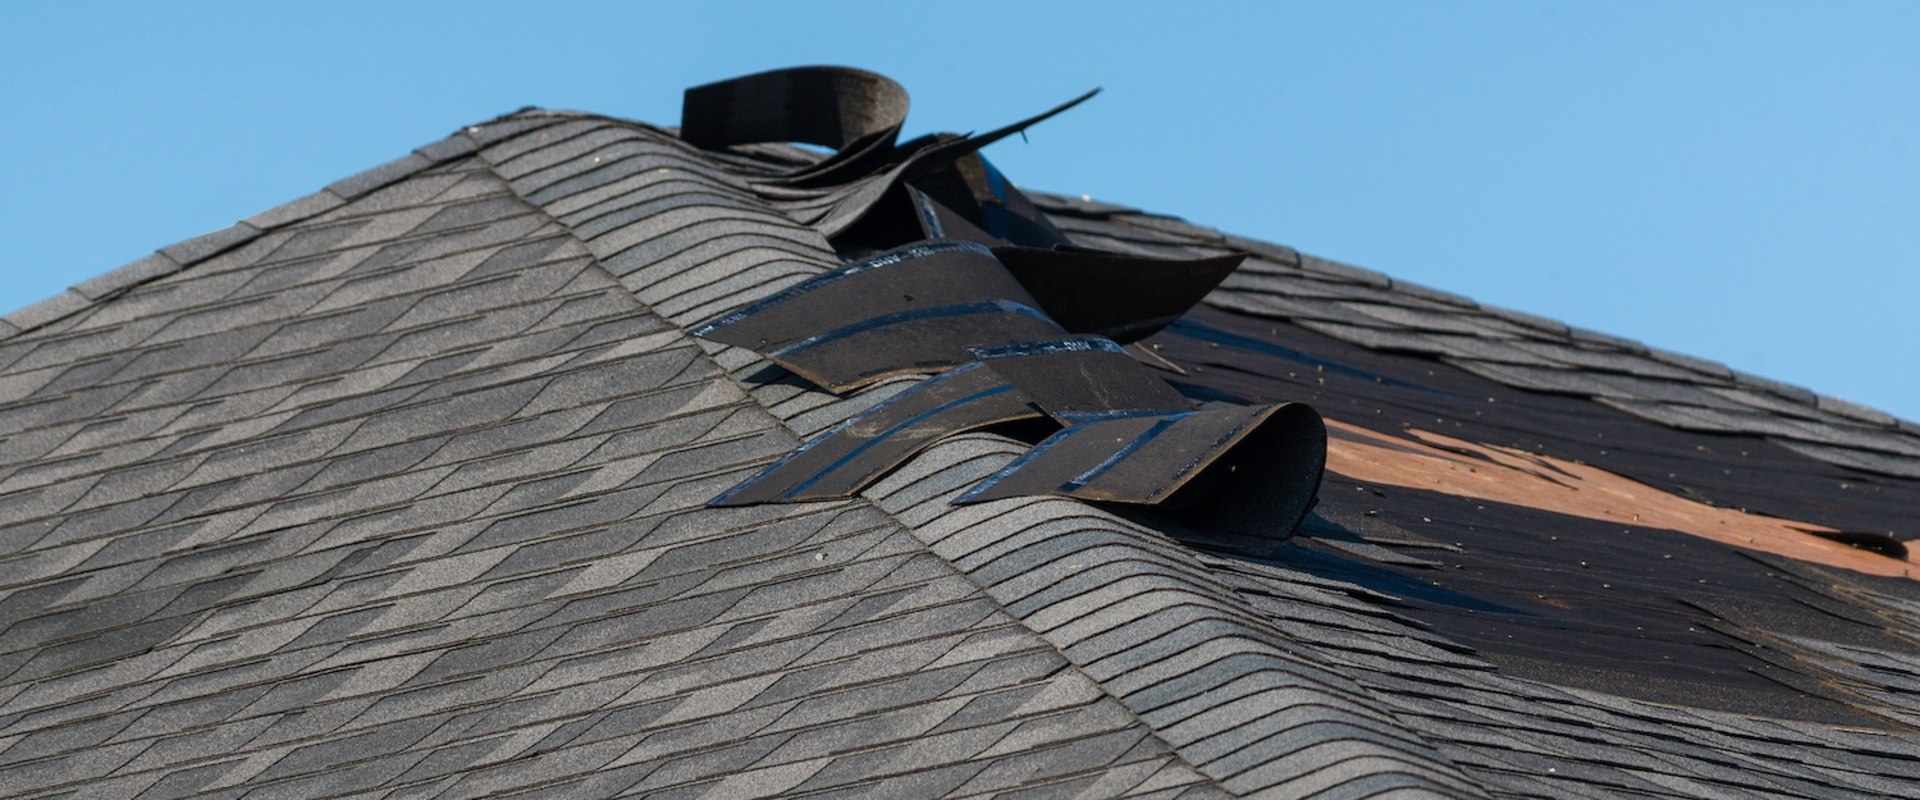 How do you prove wind damage to a roof?